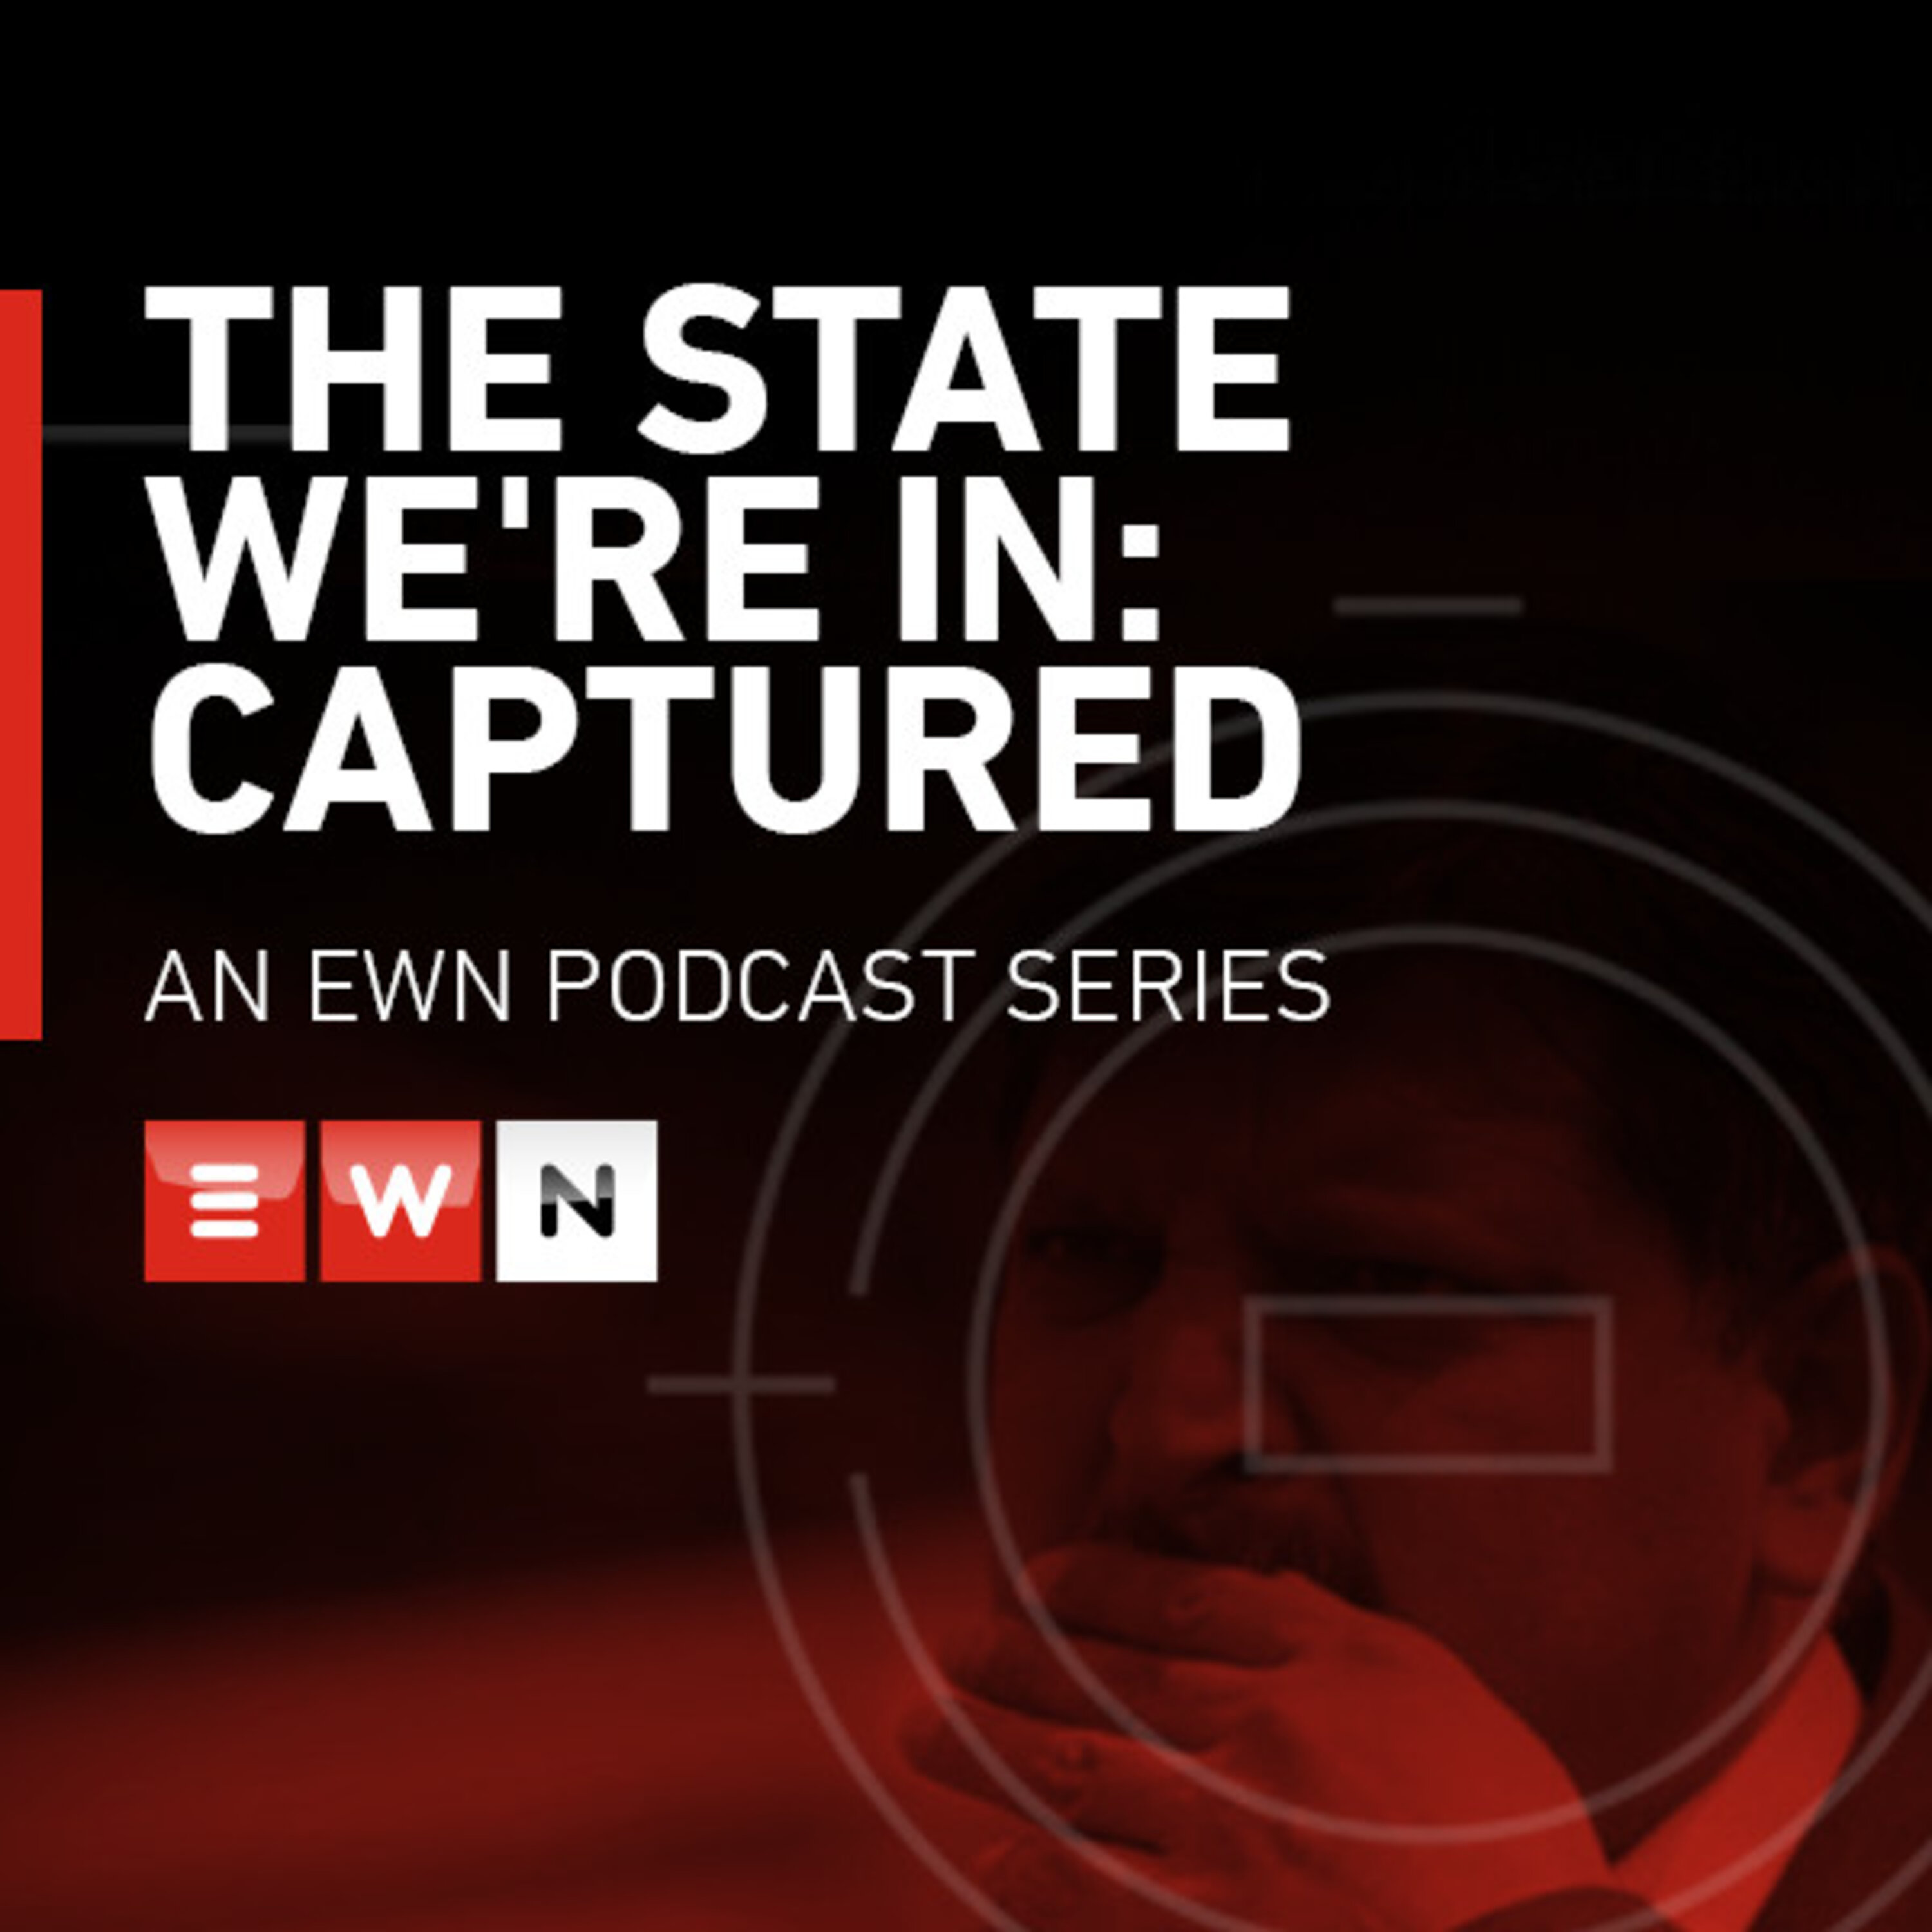 The State We're In: Captured